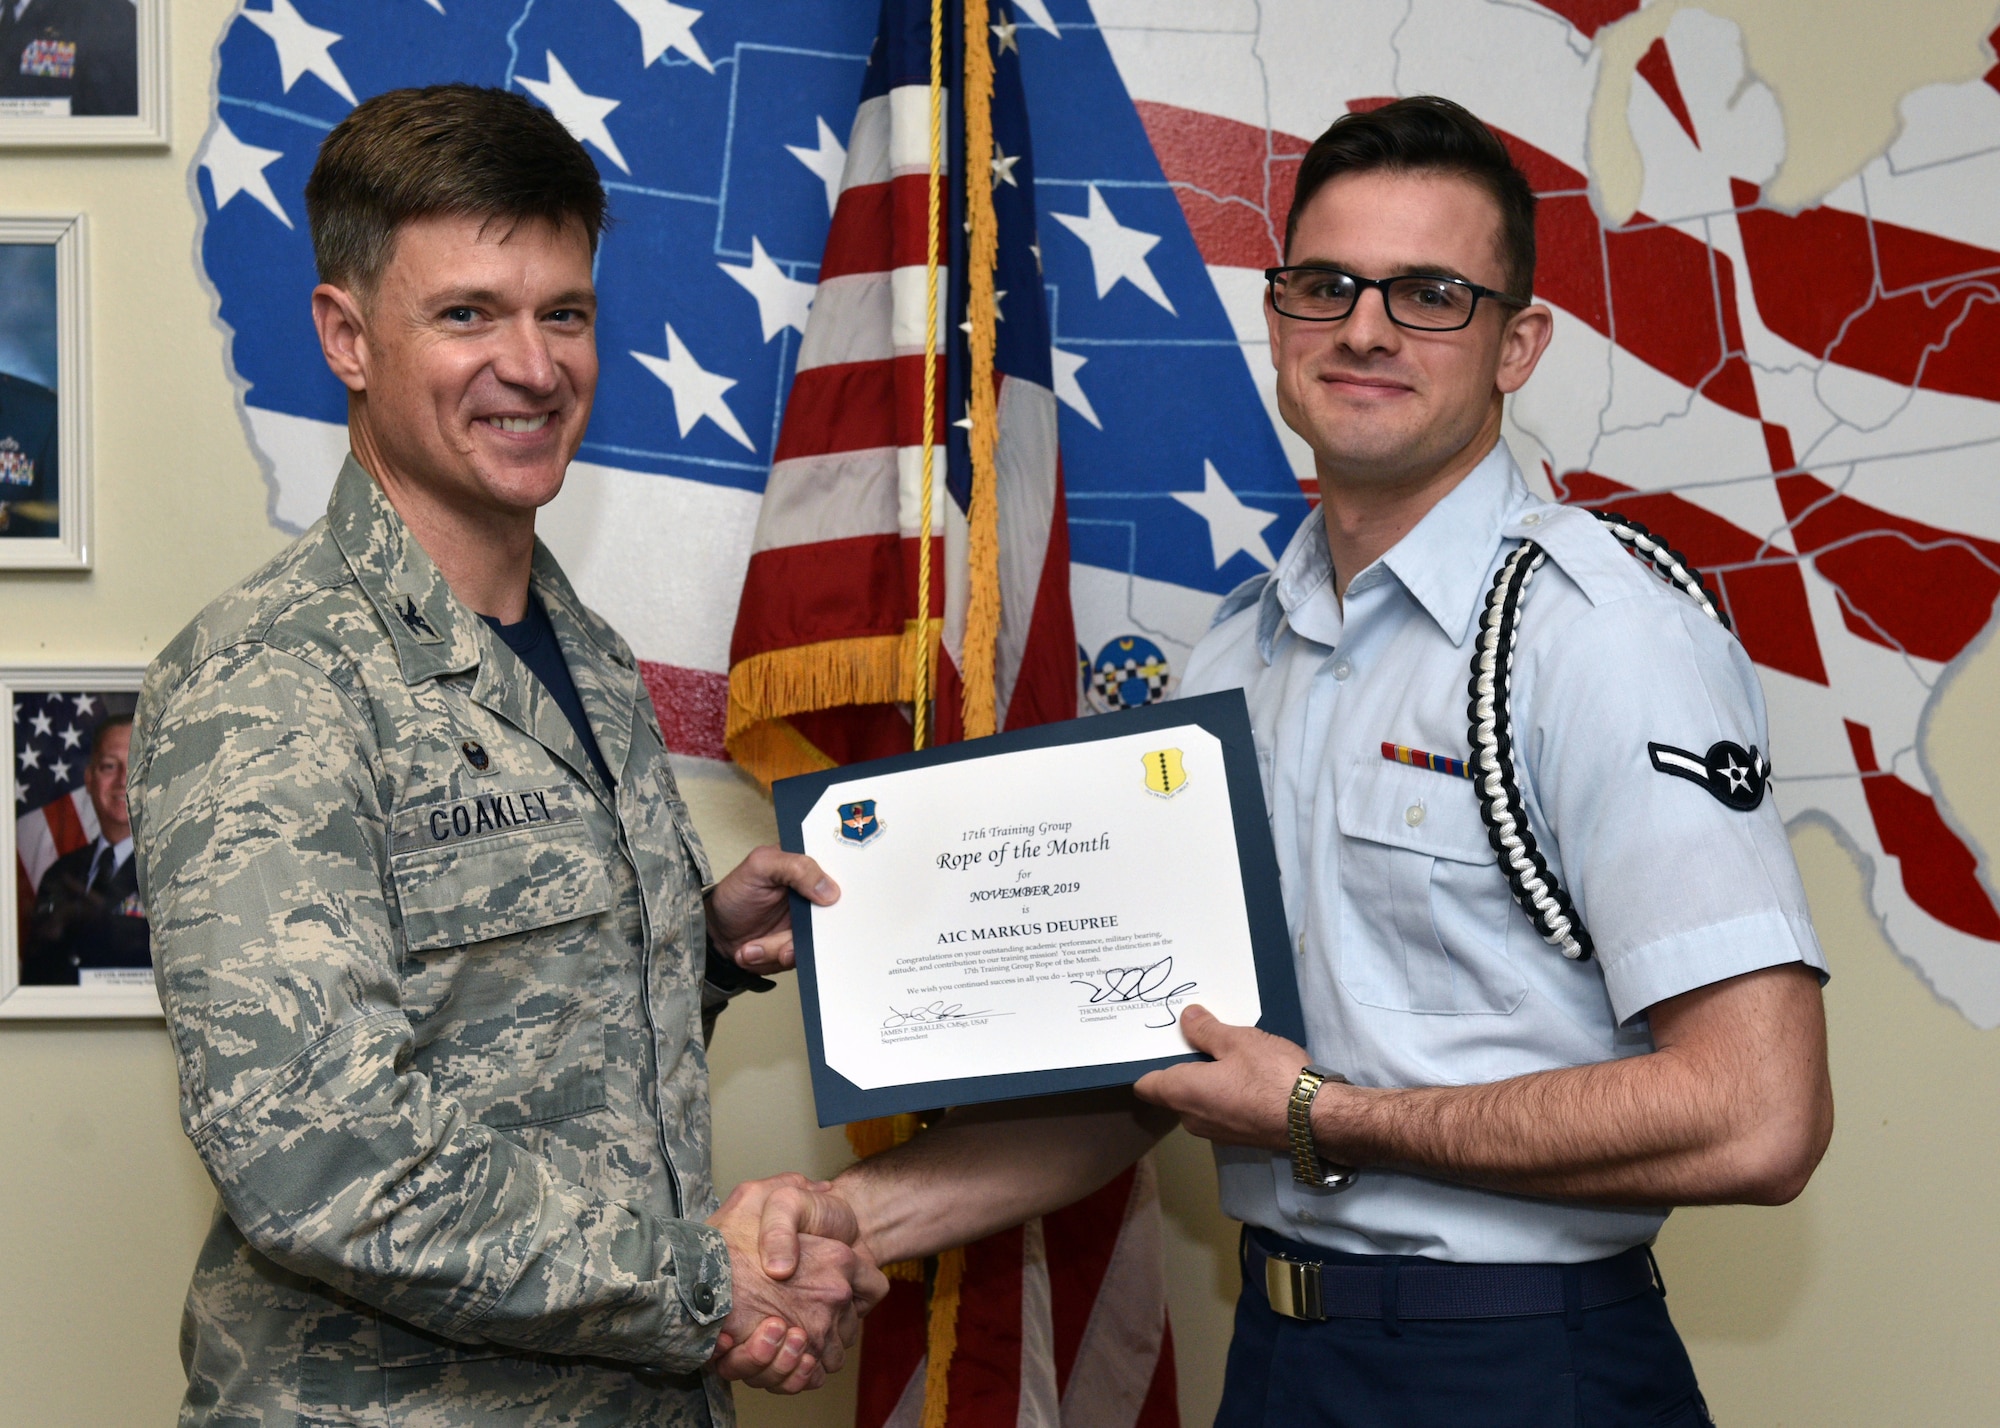 U.S. Air Force Col. Thomas Coakley, 17th Training Group commander, presents the 17th Training Group Rope of the Month award to Airman 1st Class Markus Deupree, 315th Training Squadron student, at Brandenburg Hall on Goodfellow Air Force Base, Texas, Dec. 6, 2019. The 315th TRS’s vision is to develop combat-ready intelligence, surveillance and reconnaissance professionals and promote an innovative squadron culture and identity unmatched across the U.S. Air Force. (U.S. Air Force photo by Airman 1st Class Robyn Hunsinger)